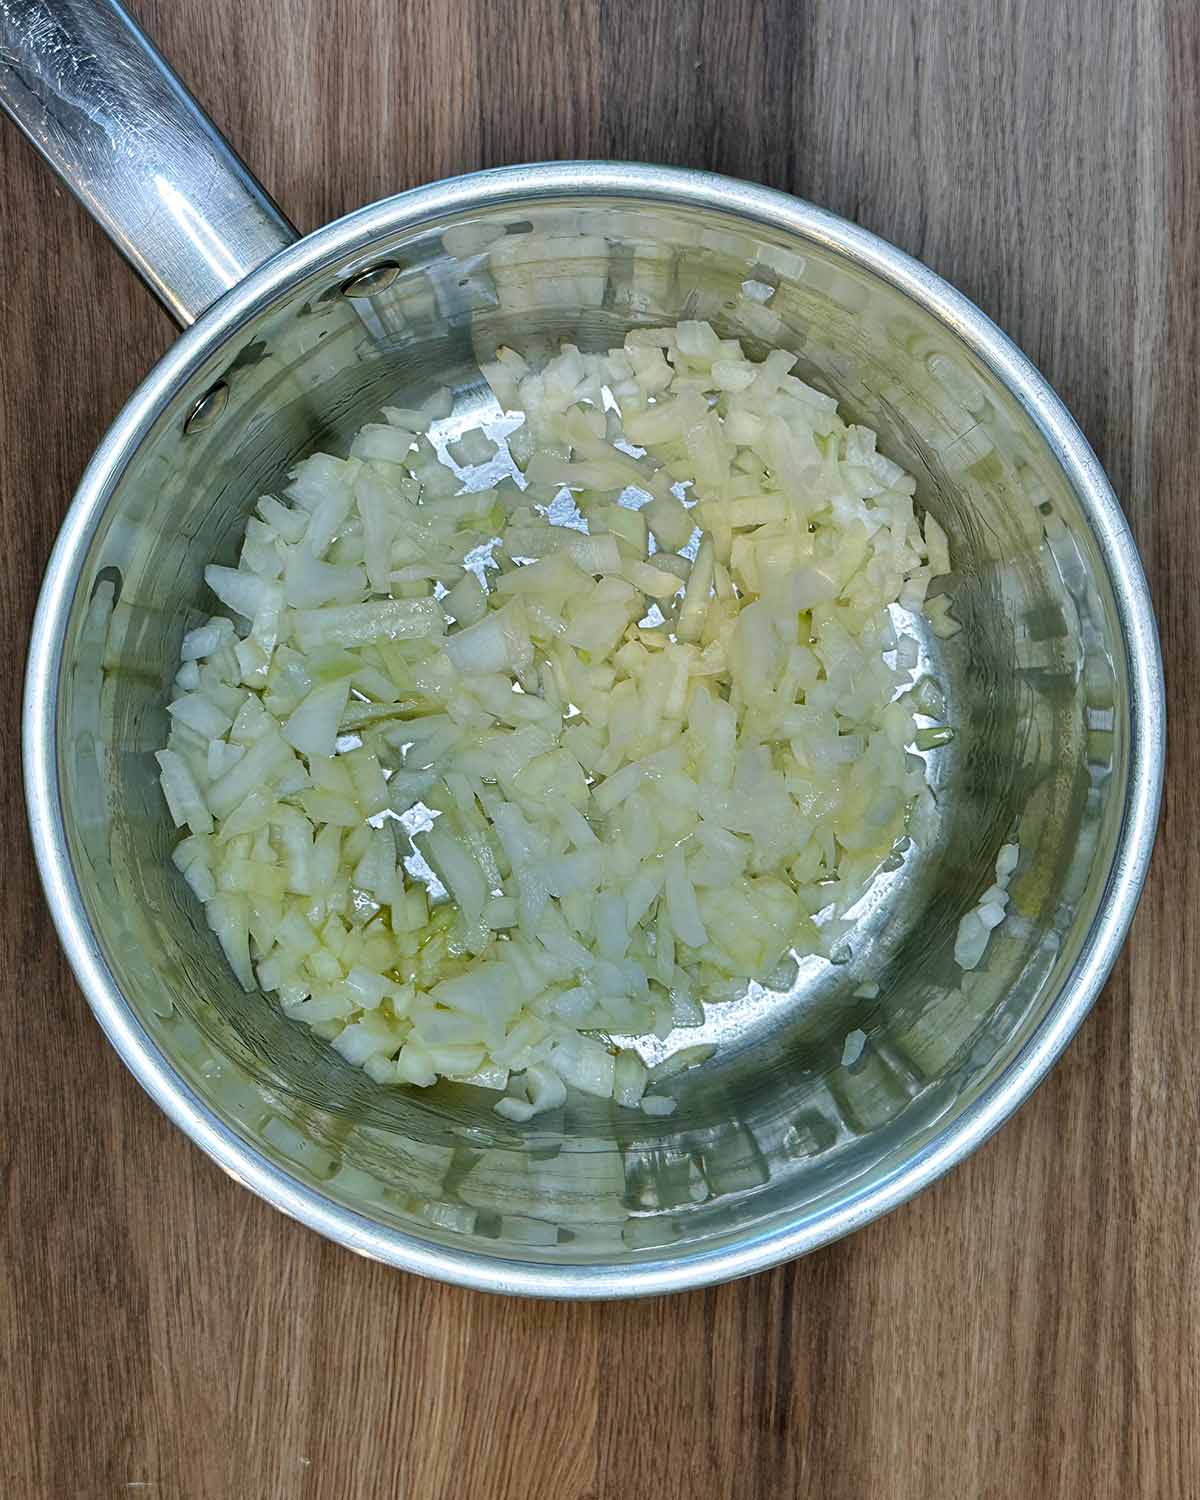 Chopped onion cooking in a silver saucepan.